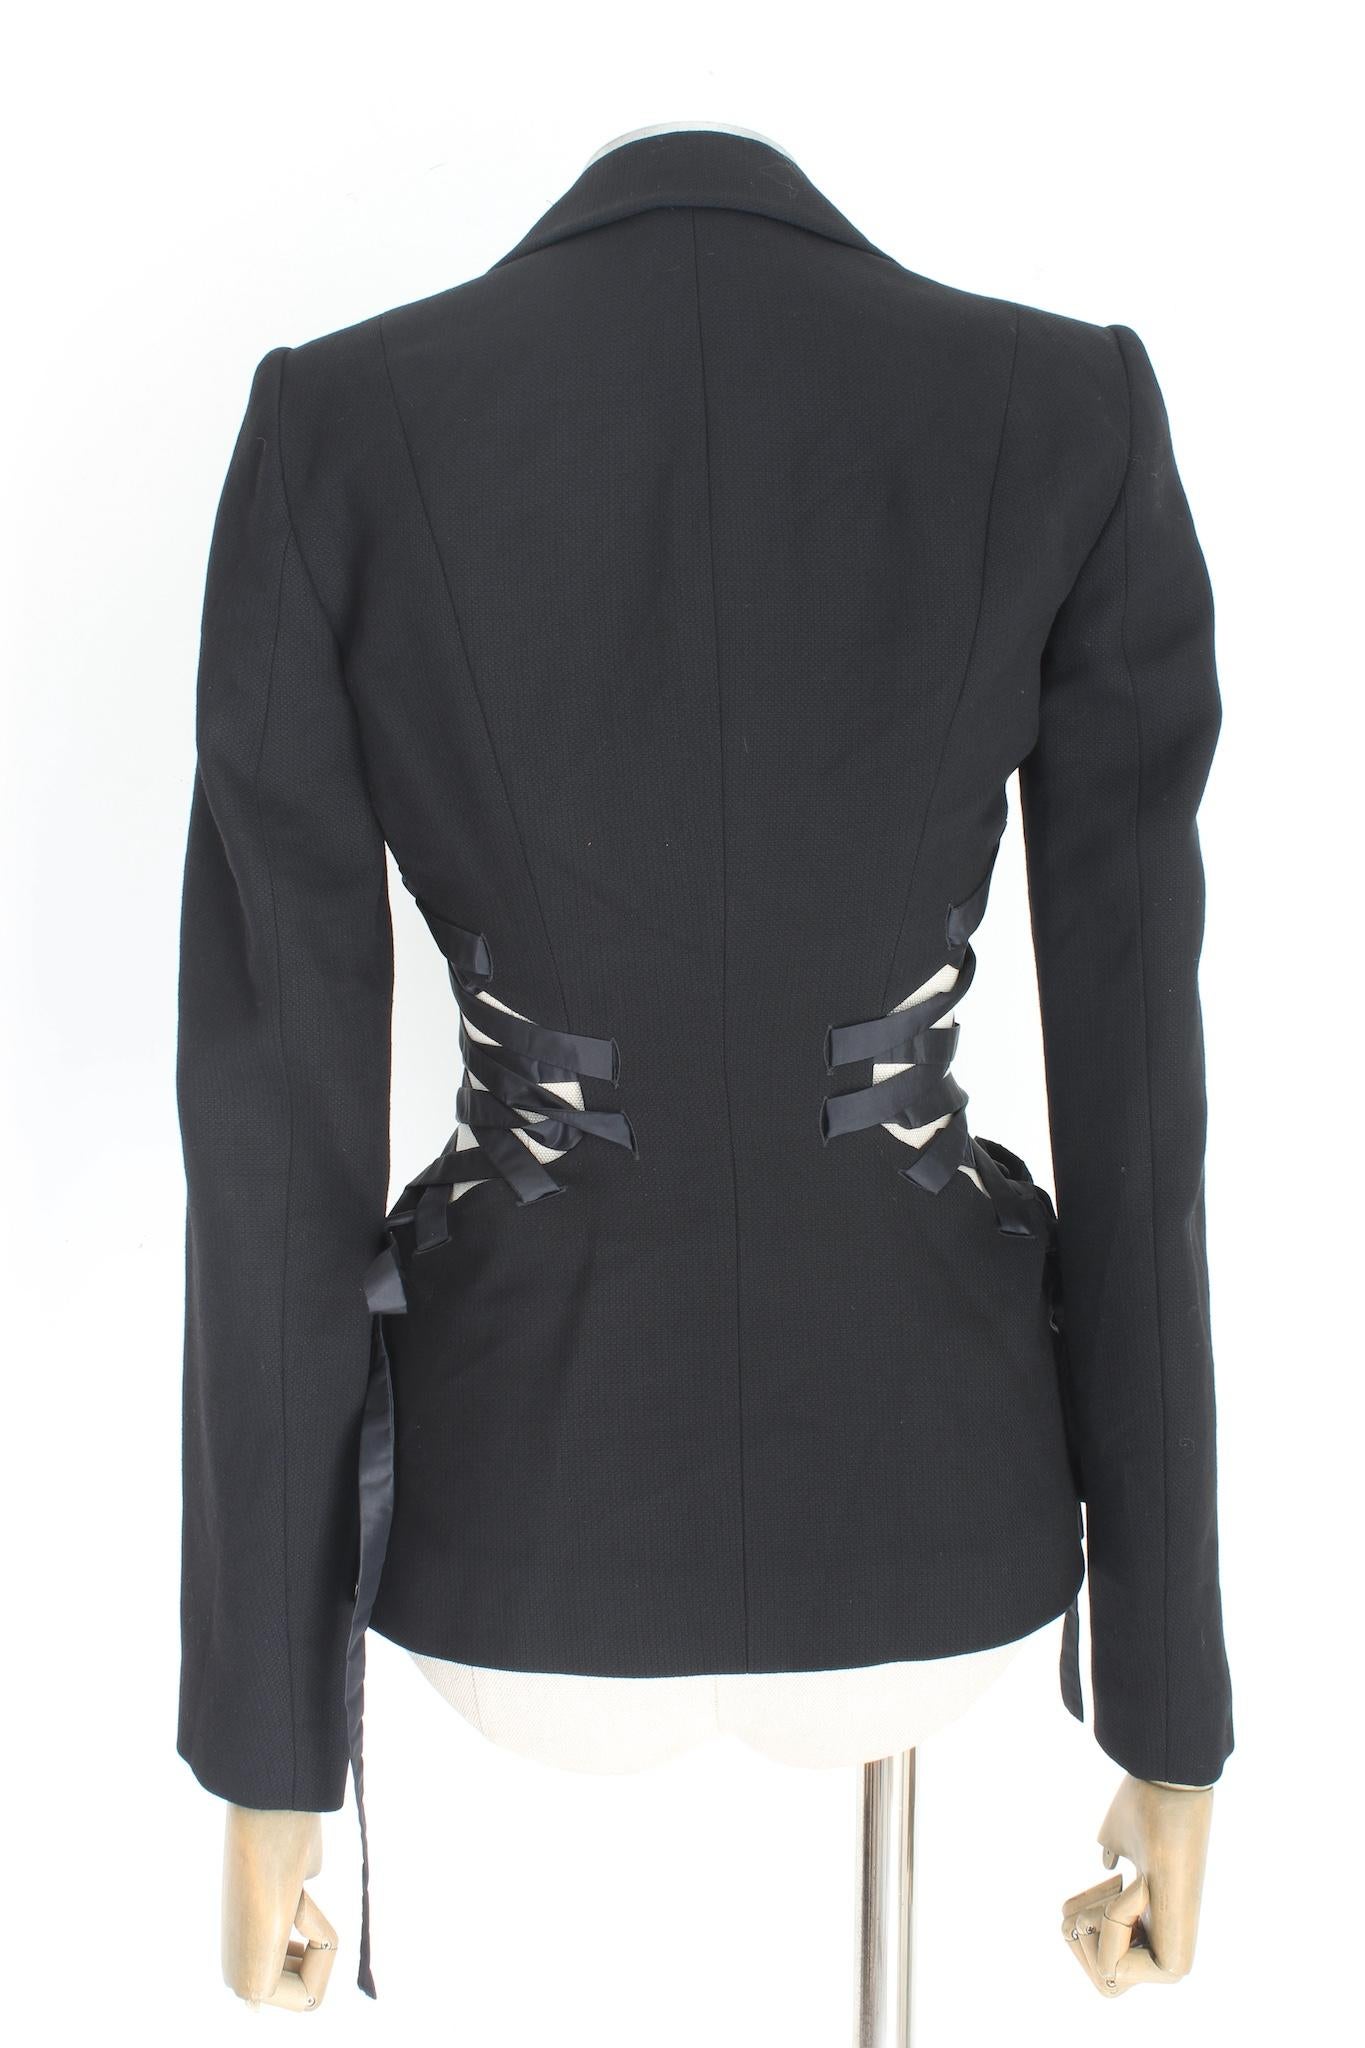 Roberto Cavalli elegant 2000s jacket. Black blazer, slim fit with luxurious silk details on the sides, which make the jacket special for a glamorous evening. Lapel in silk. 35% viscose, 65% wool fabric, internally lined. Made in Italy.

Size: